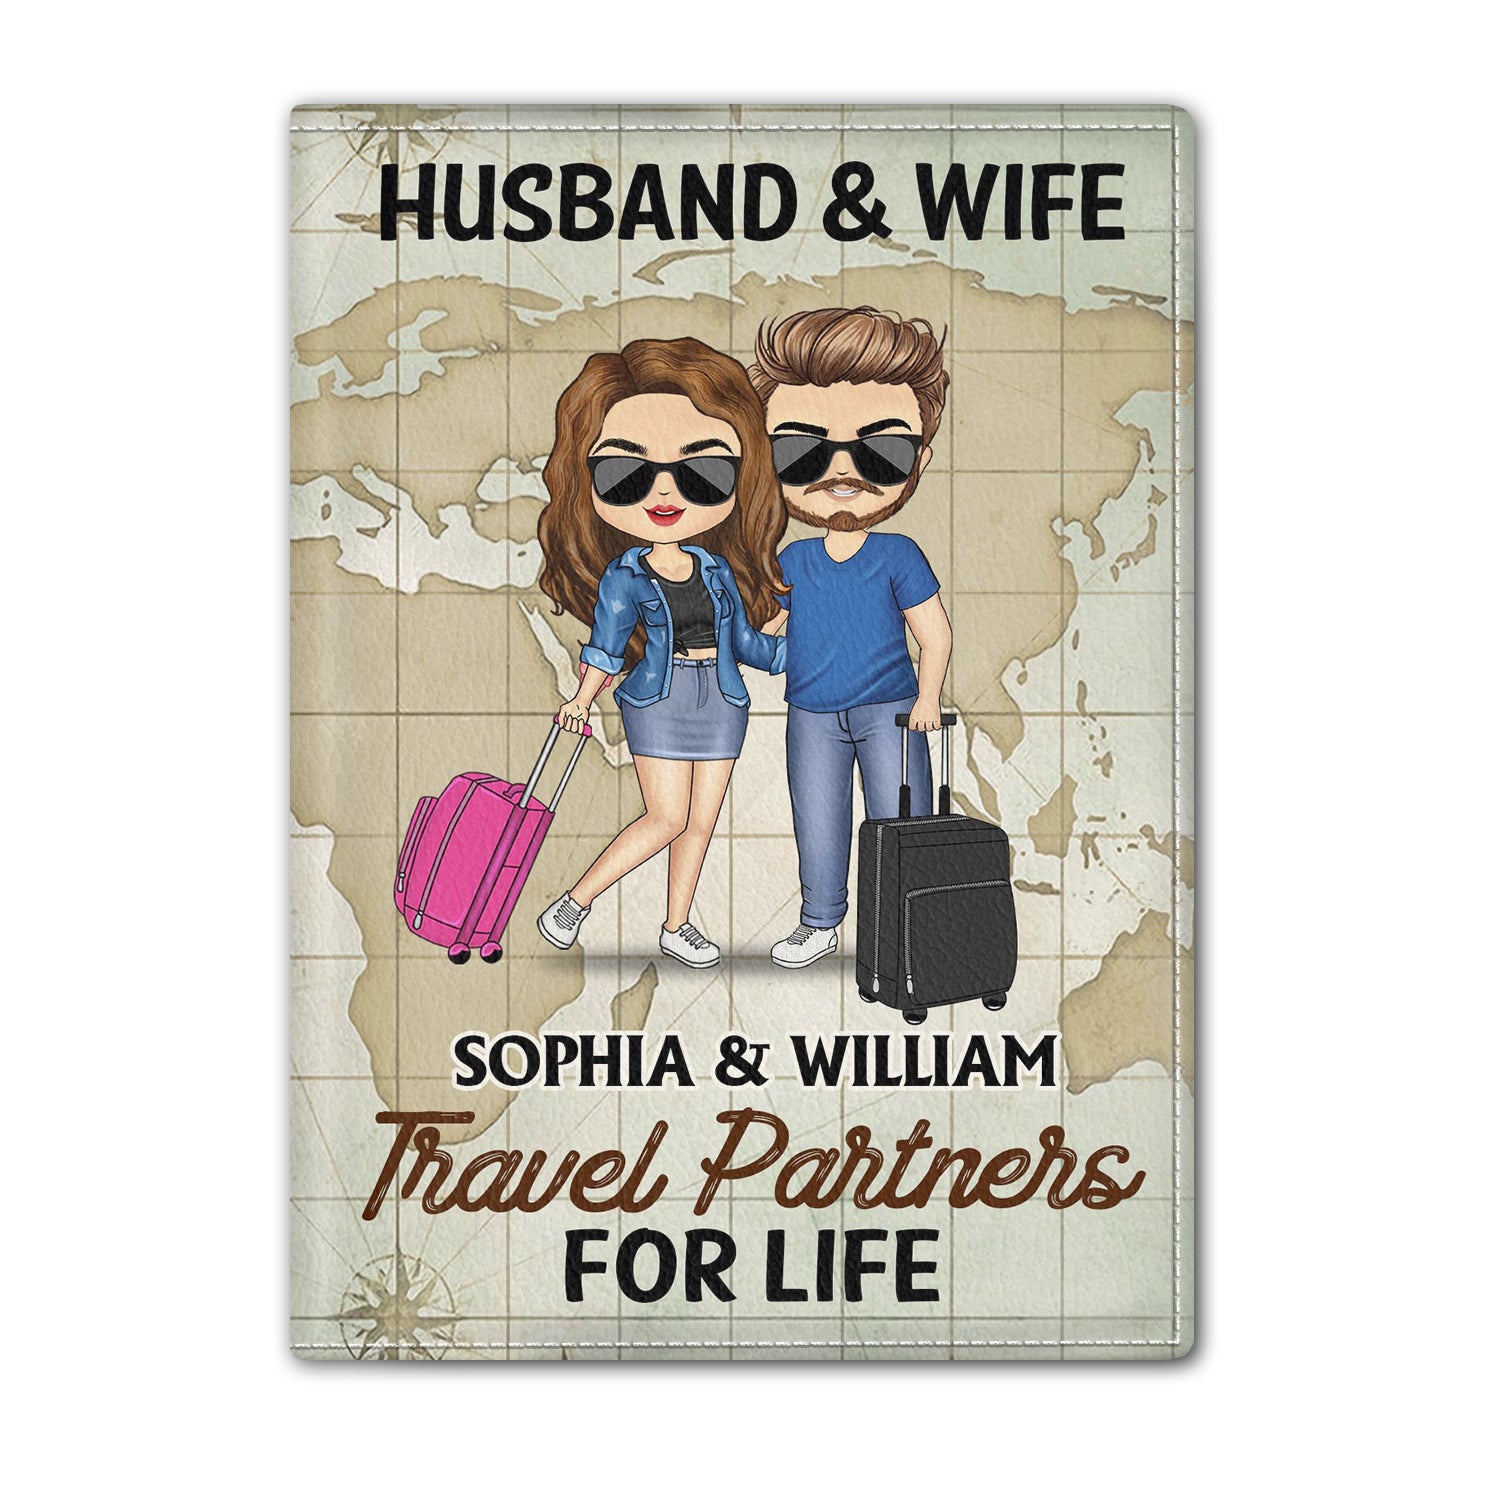 Husband & Wife Travel Partners For Life - Birthday Gift For Couple, Family, Travel, Vacation Lovers - Personalized Custom Passport Cover, Passport Holder